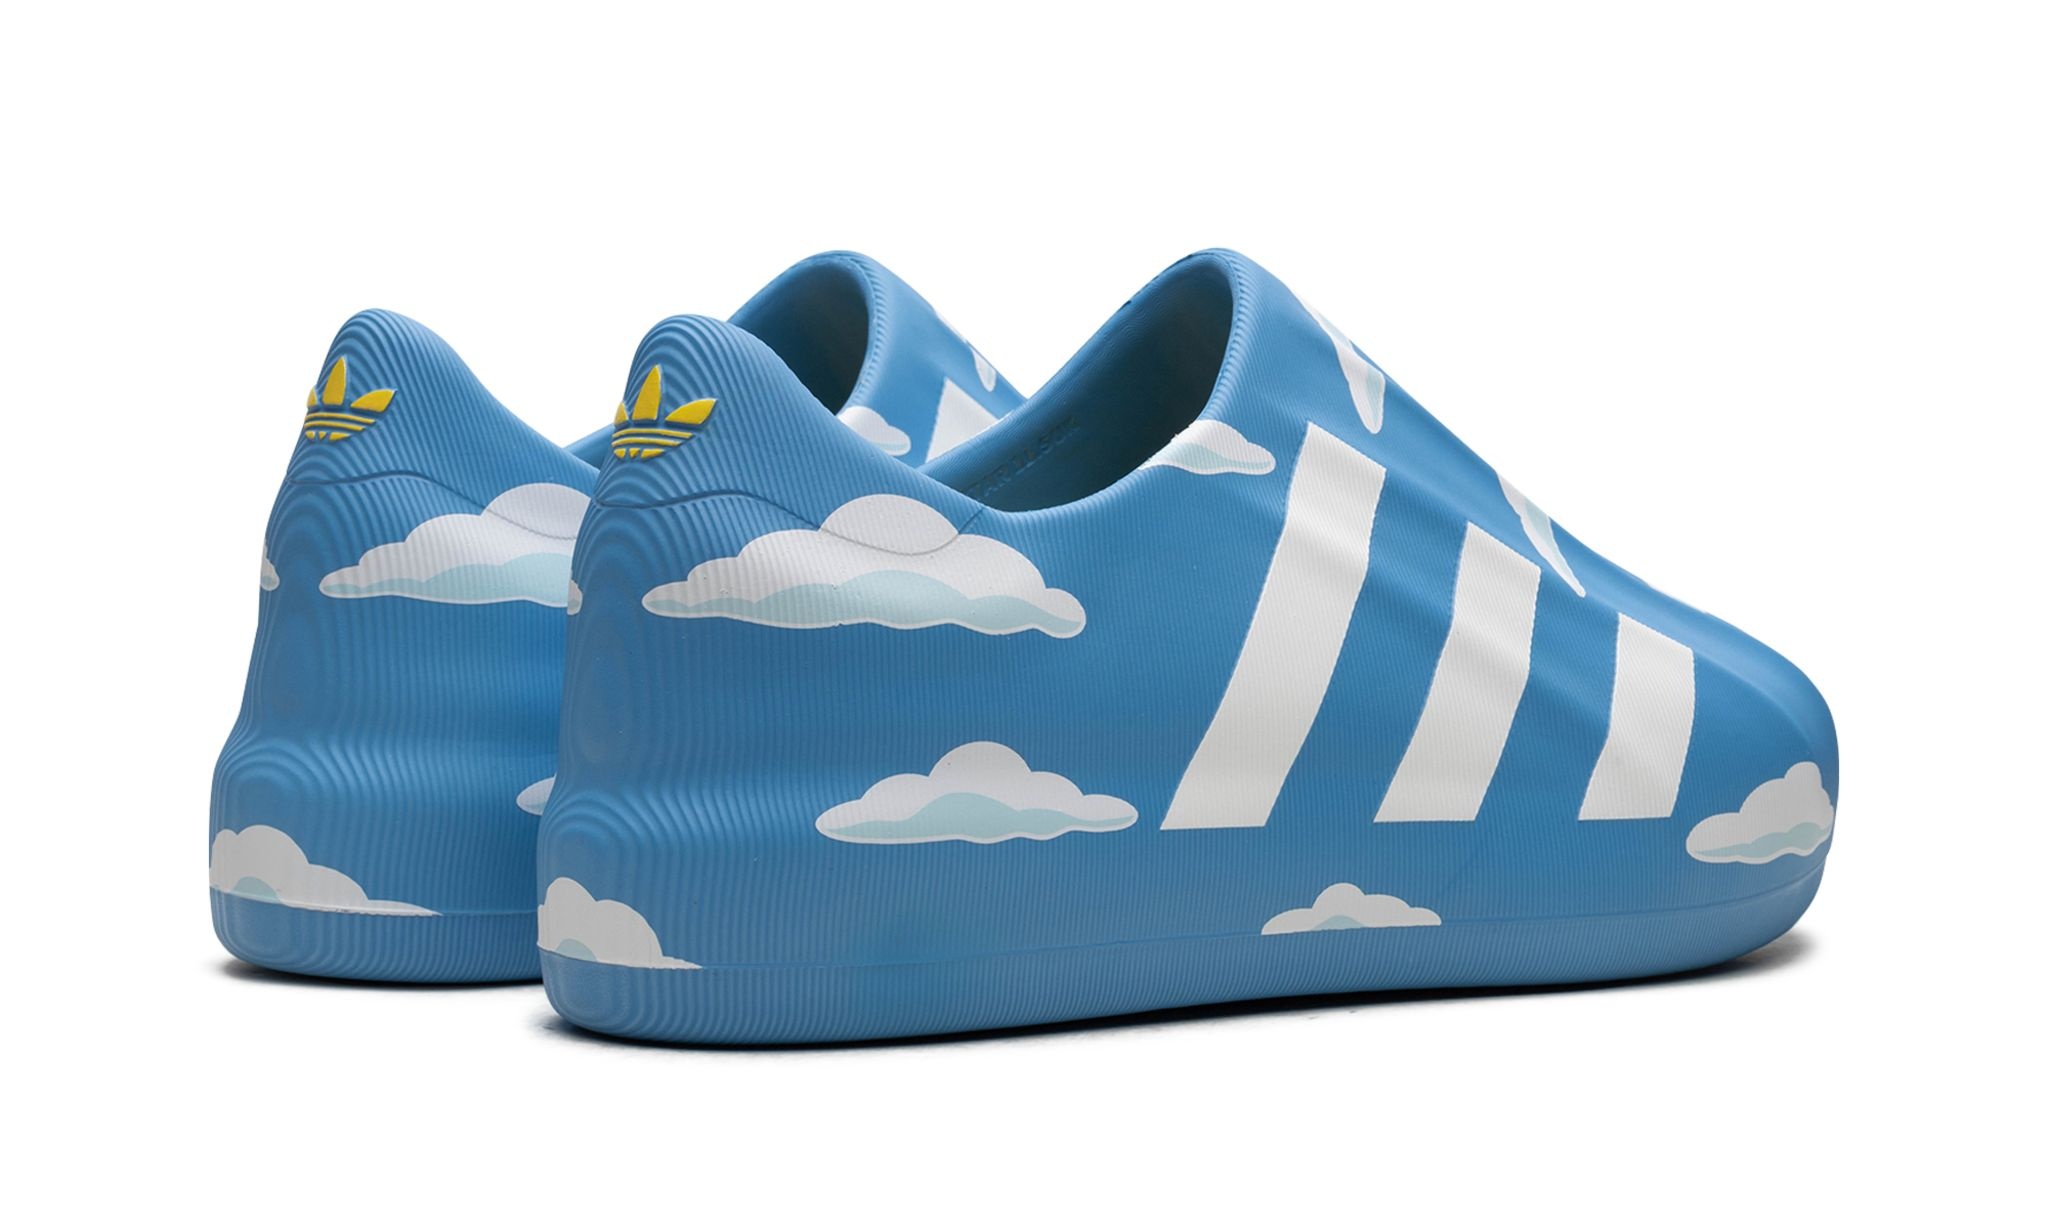 adiFOM Superstar Low "The Simpsons - Clouds" - 3